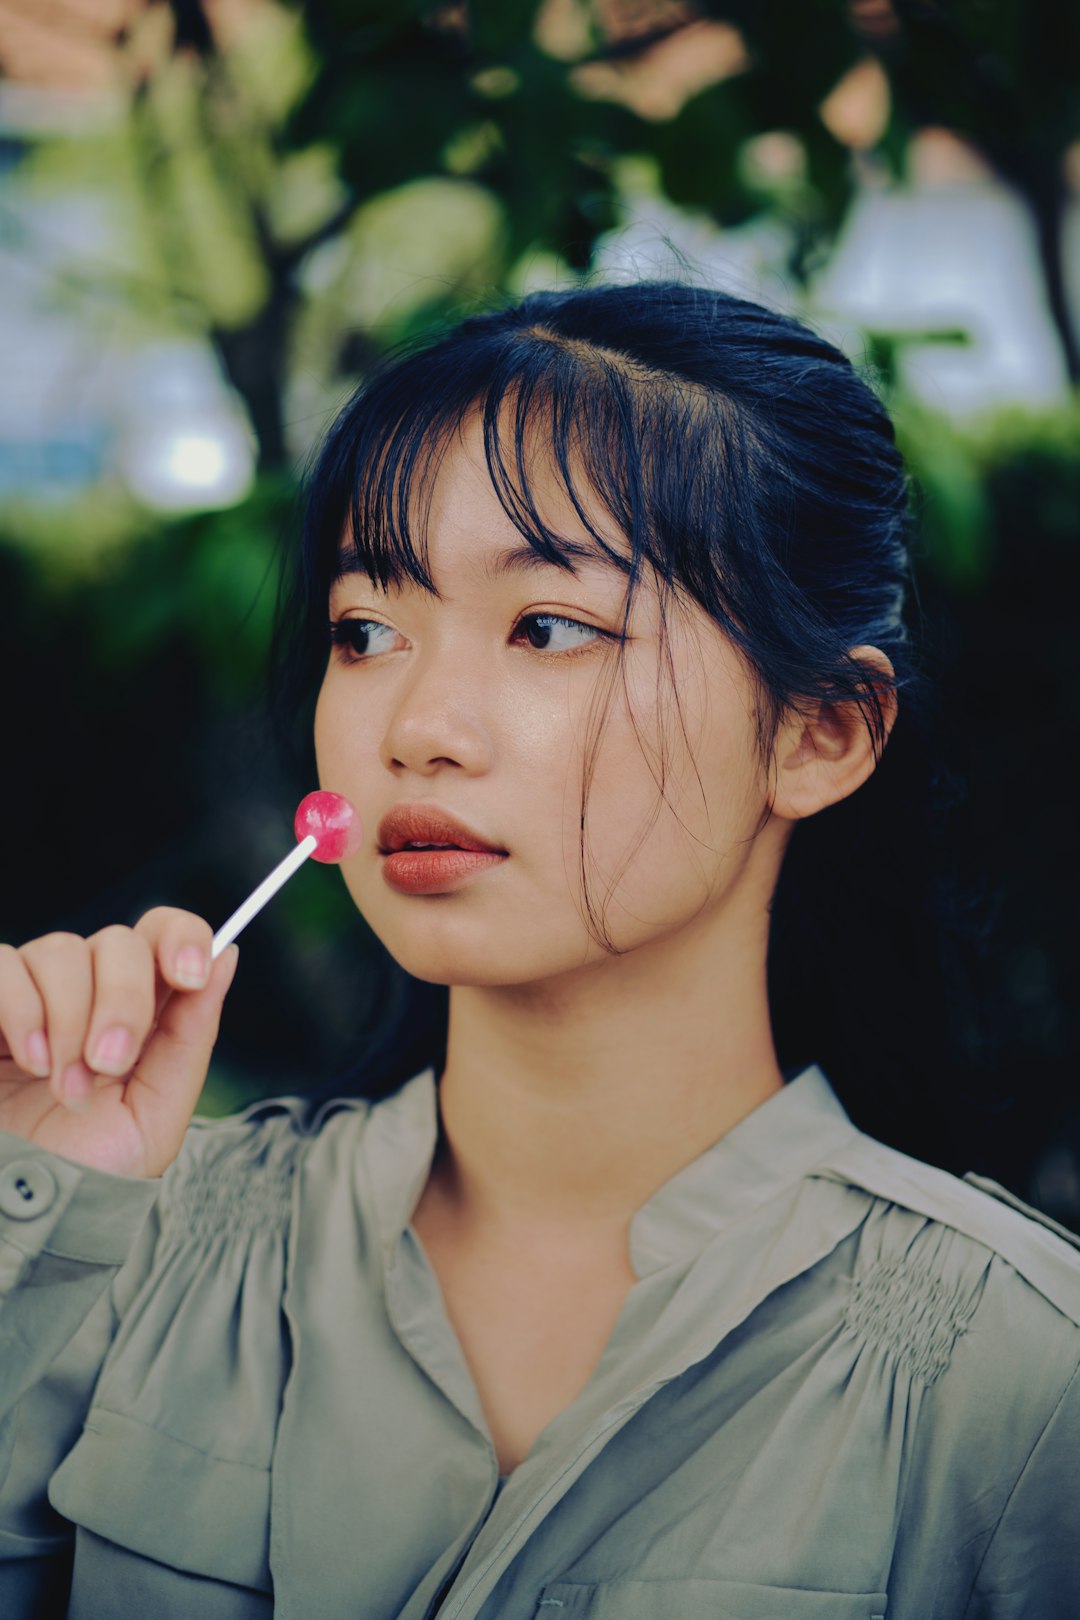 woman in gray button up shirt holding pink lollipop